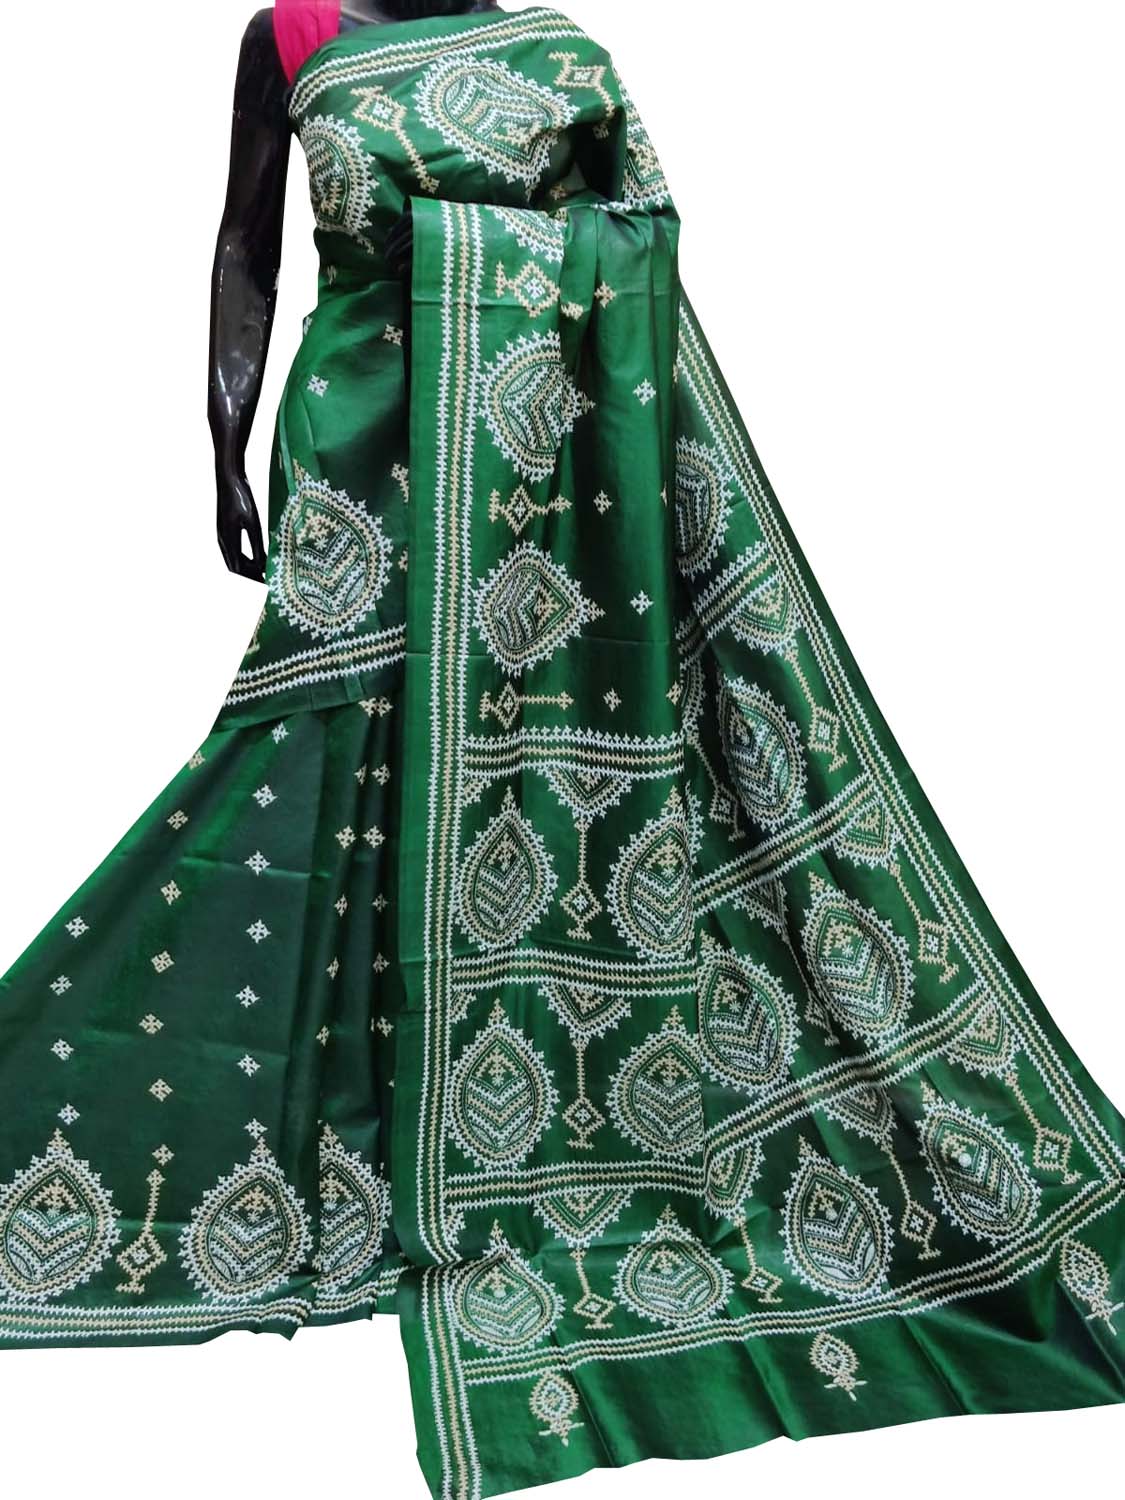 Exquisite Green Kantha Gujrati Stitch Hand Embroidered Pure Bangalore Silk Saree: A Timeless Beauty - Luxurion World